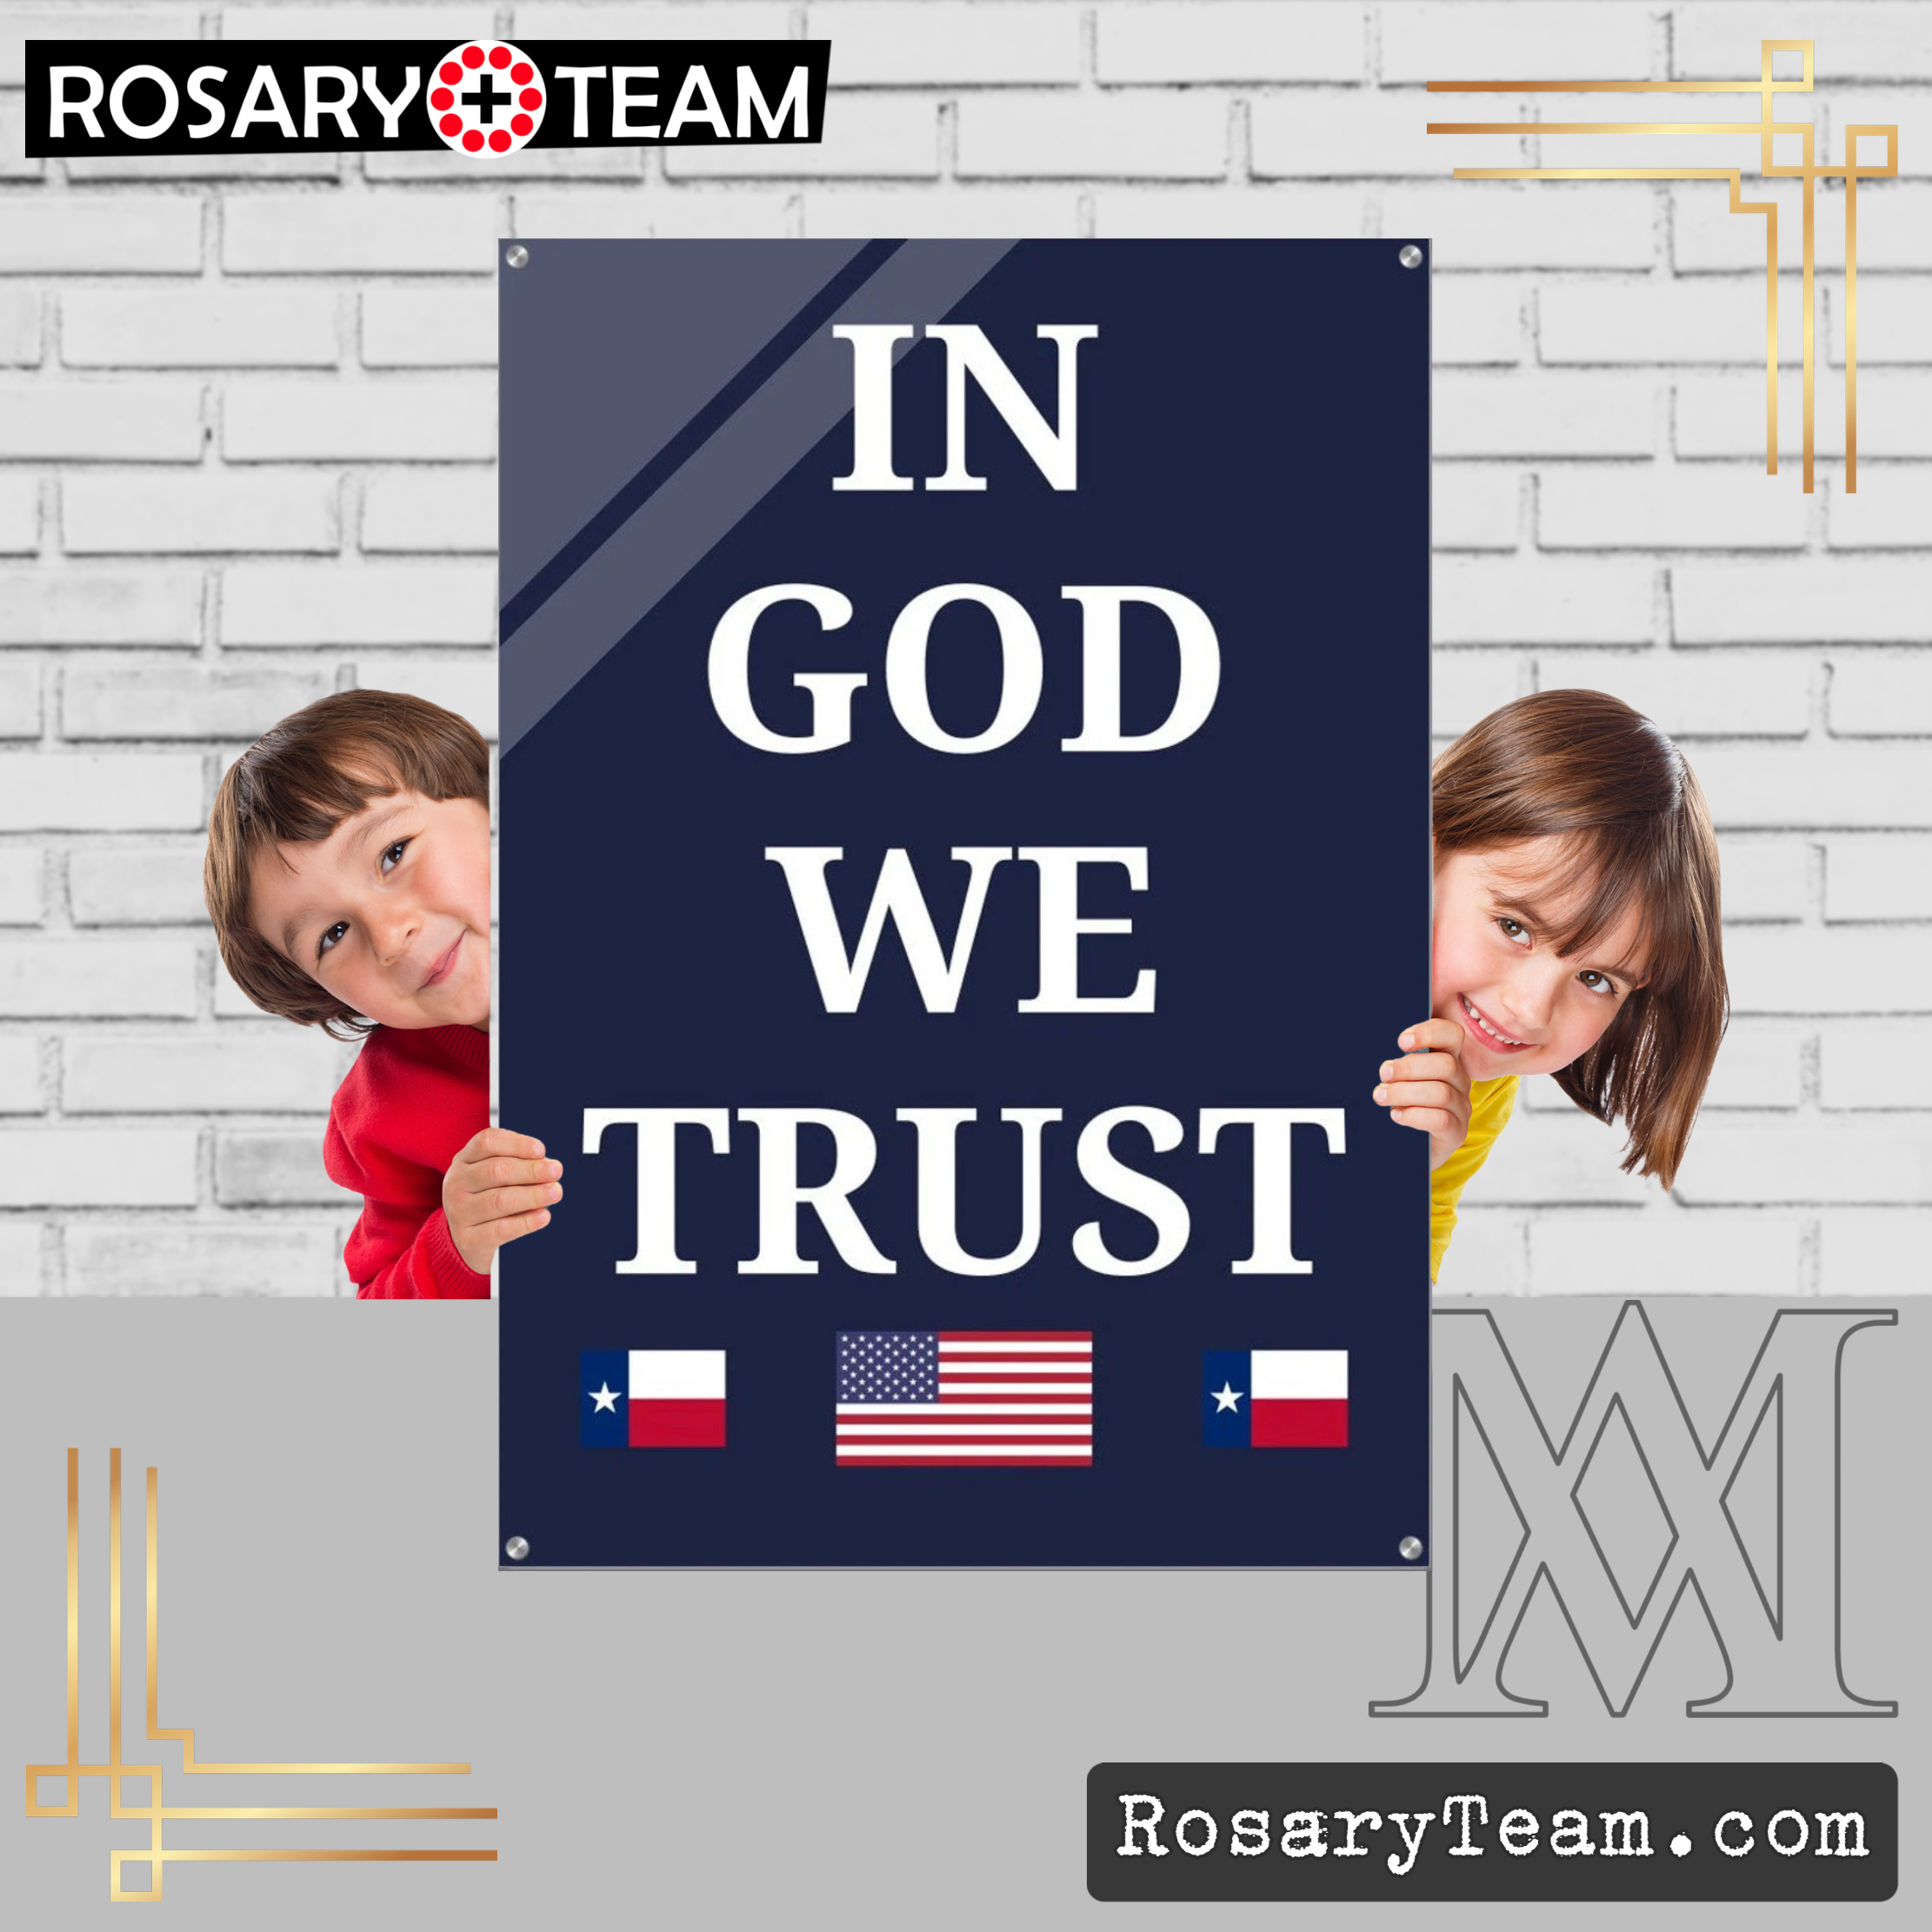 In God We Trust Premium Stunning Quality Acrylic Prints – With American and Texas Flag – Great to be donated to your School District Wall Art Rosary.Team